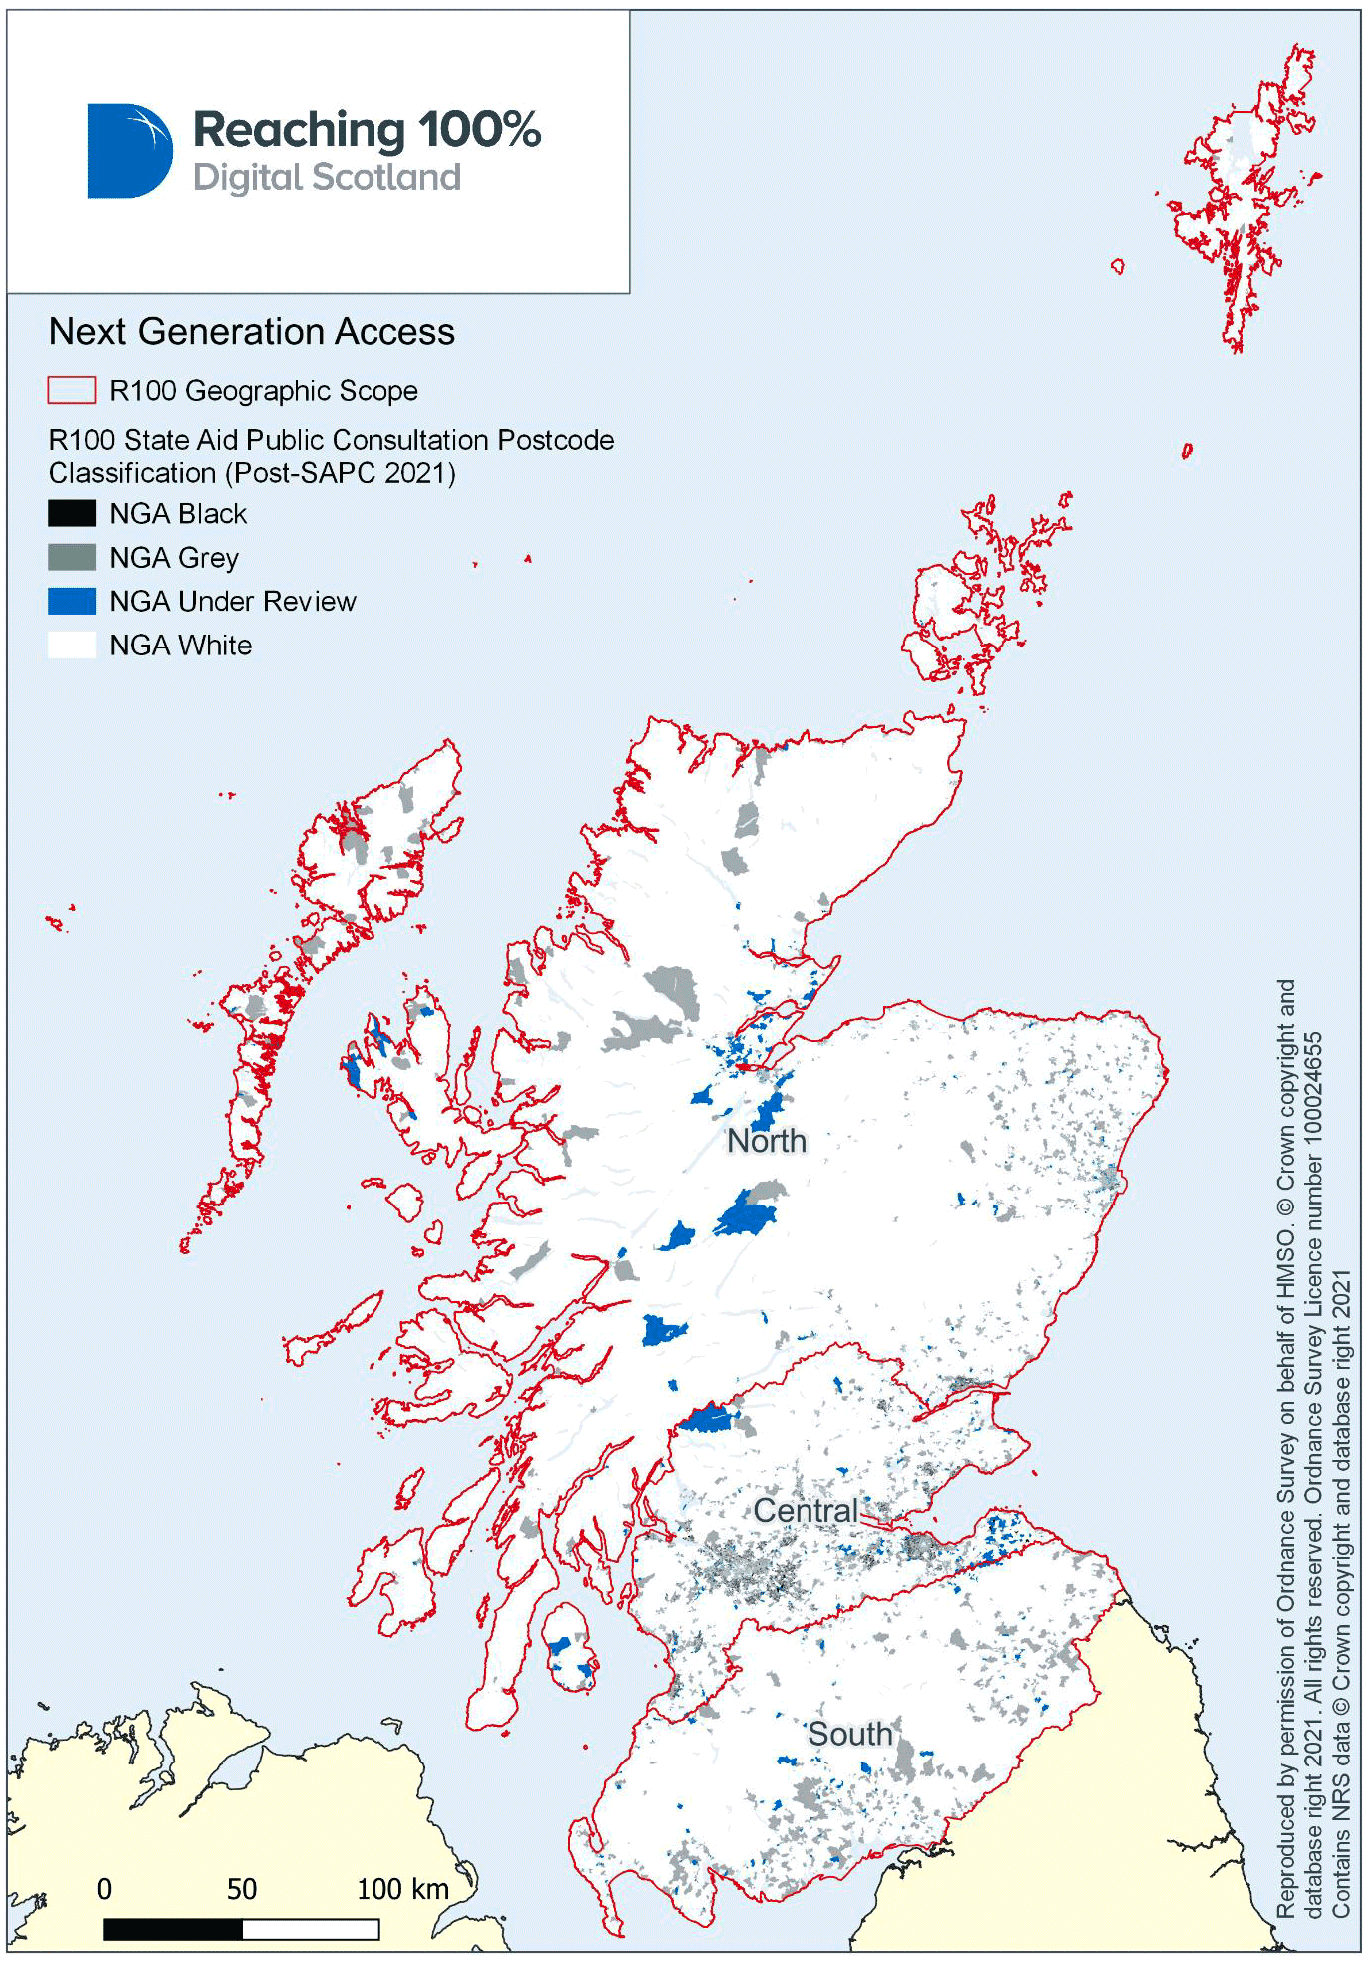 Map showing coverage of next generation access broadband availability across Scotland